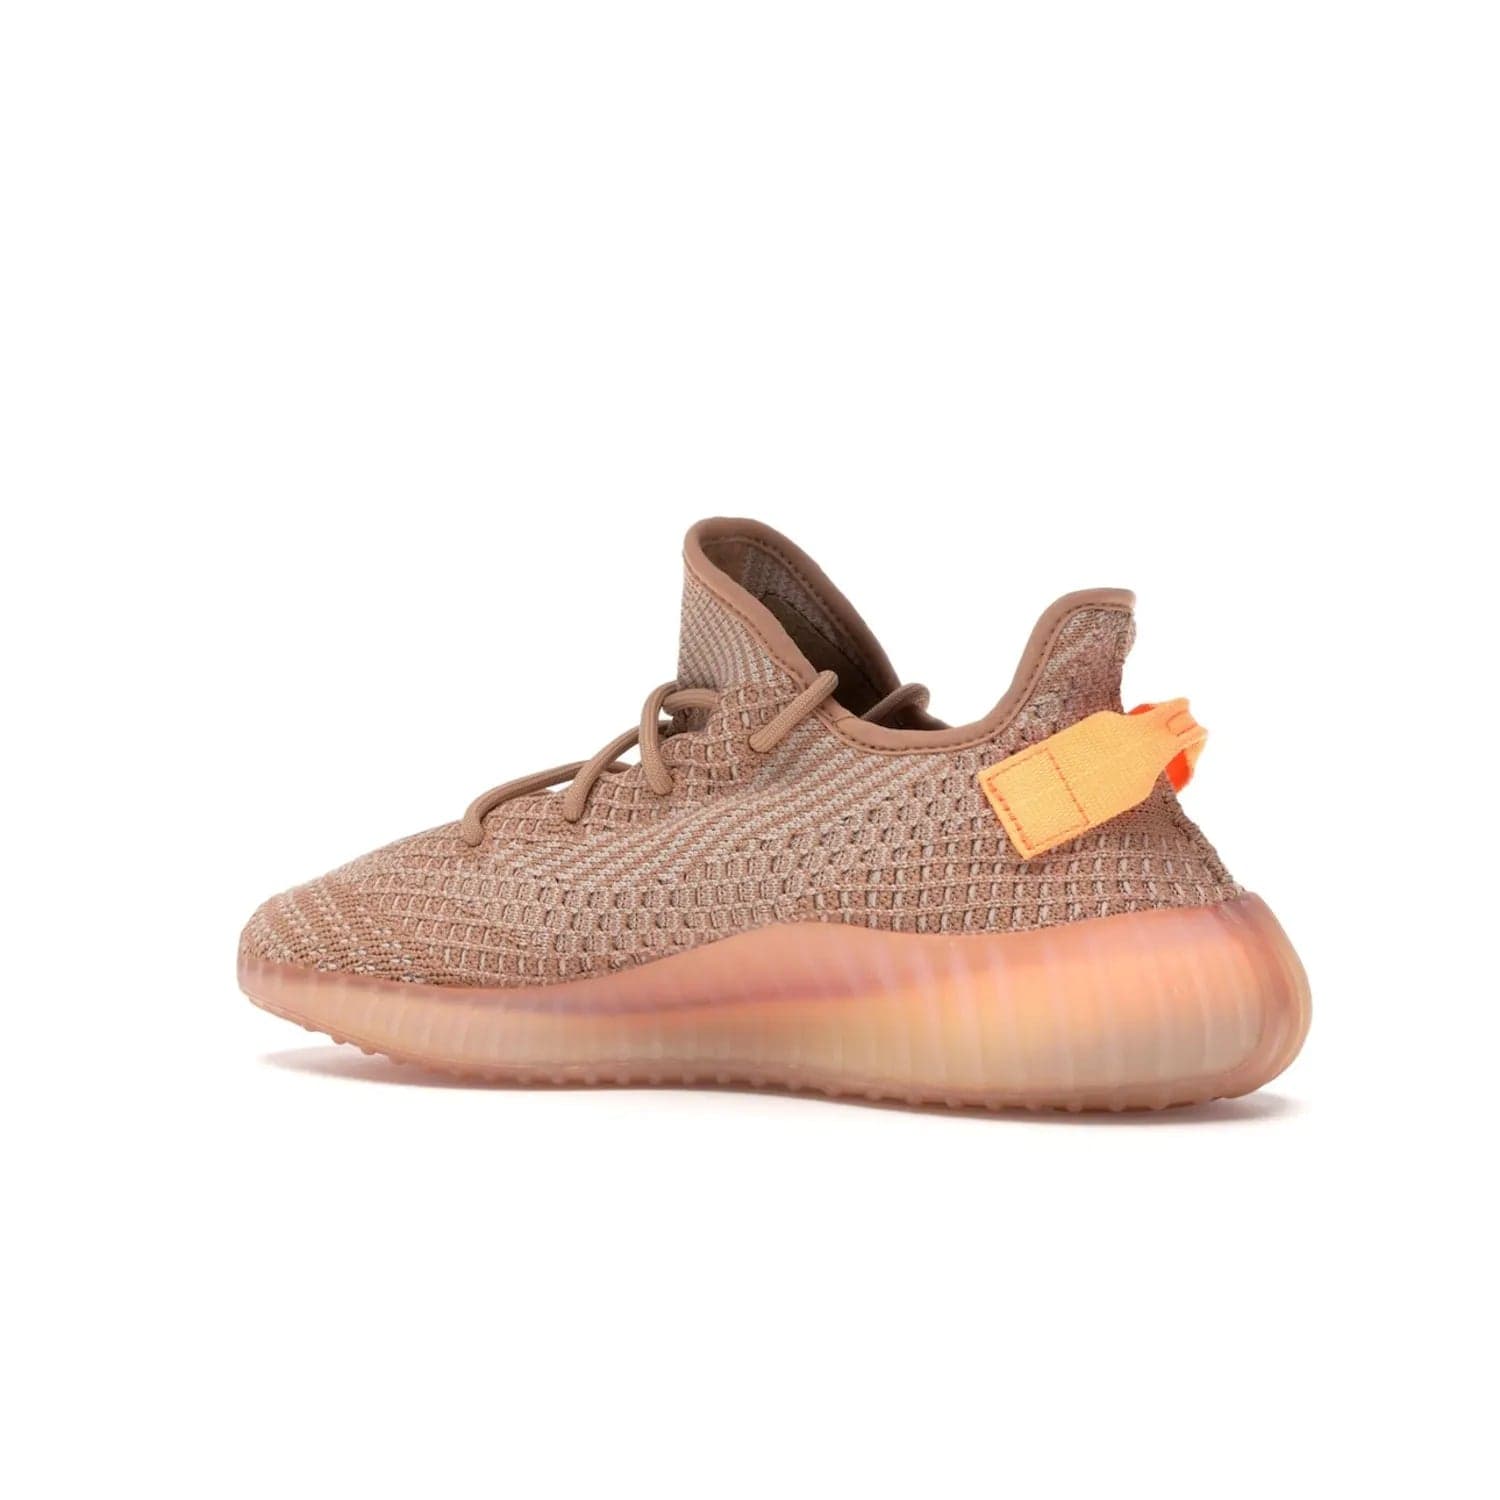 adidas Yeezy Boost 350 V2 Clay - Image 22 - Only at www.BallersClubKickz.com - The adidas Yeezy Boost 350 V2 Clay - style and swag in one shoe. Orange accents, clay midsole and sole. Get yours today!